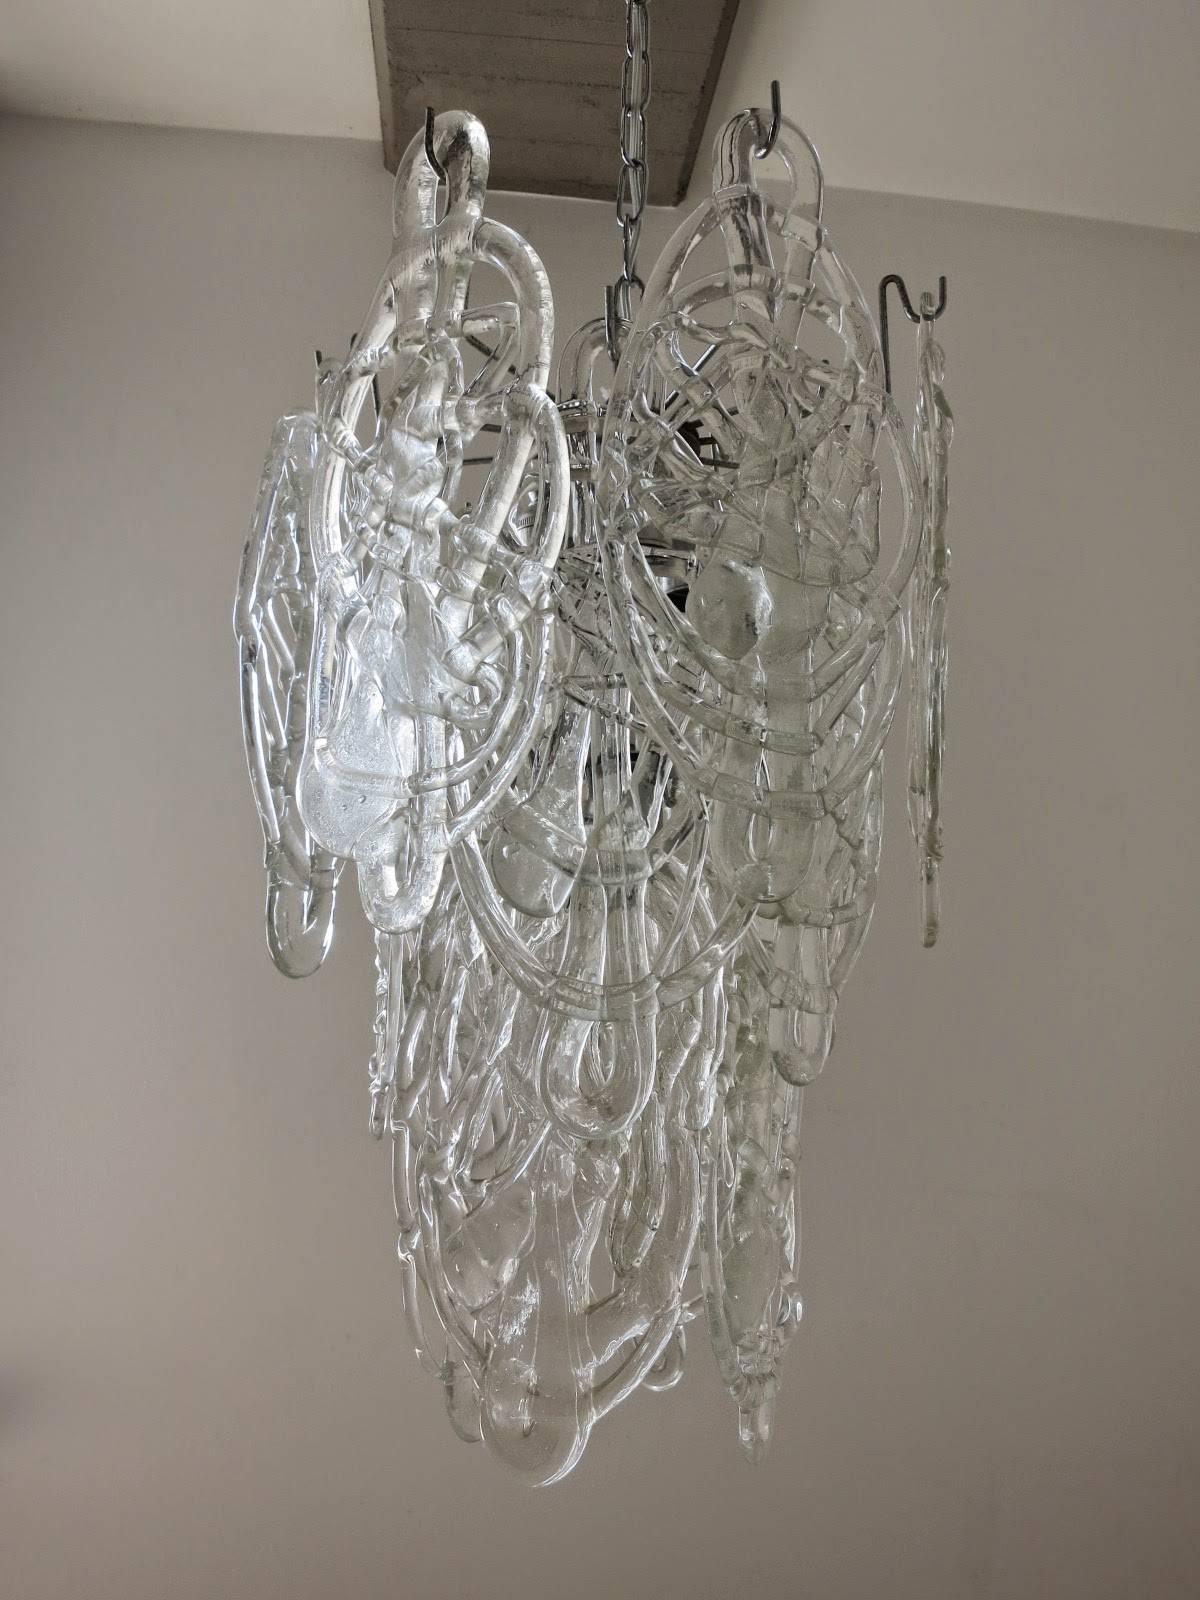 Vintage Italian chandelier with 16 clear Murano glasses hand blown to artistically resemble a cobweb, mounted on chrome frame / Designed by Vistosi circa 1960’s / Made in Italy
4 lights / E12 or E14 type / max 40W each
Diameter: 14 inches / Height: